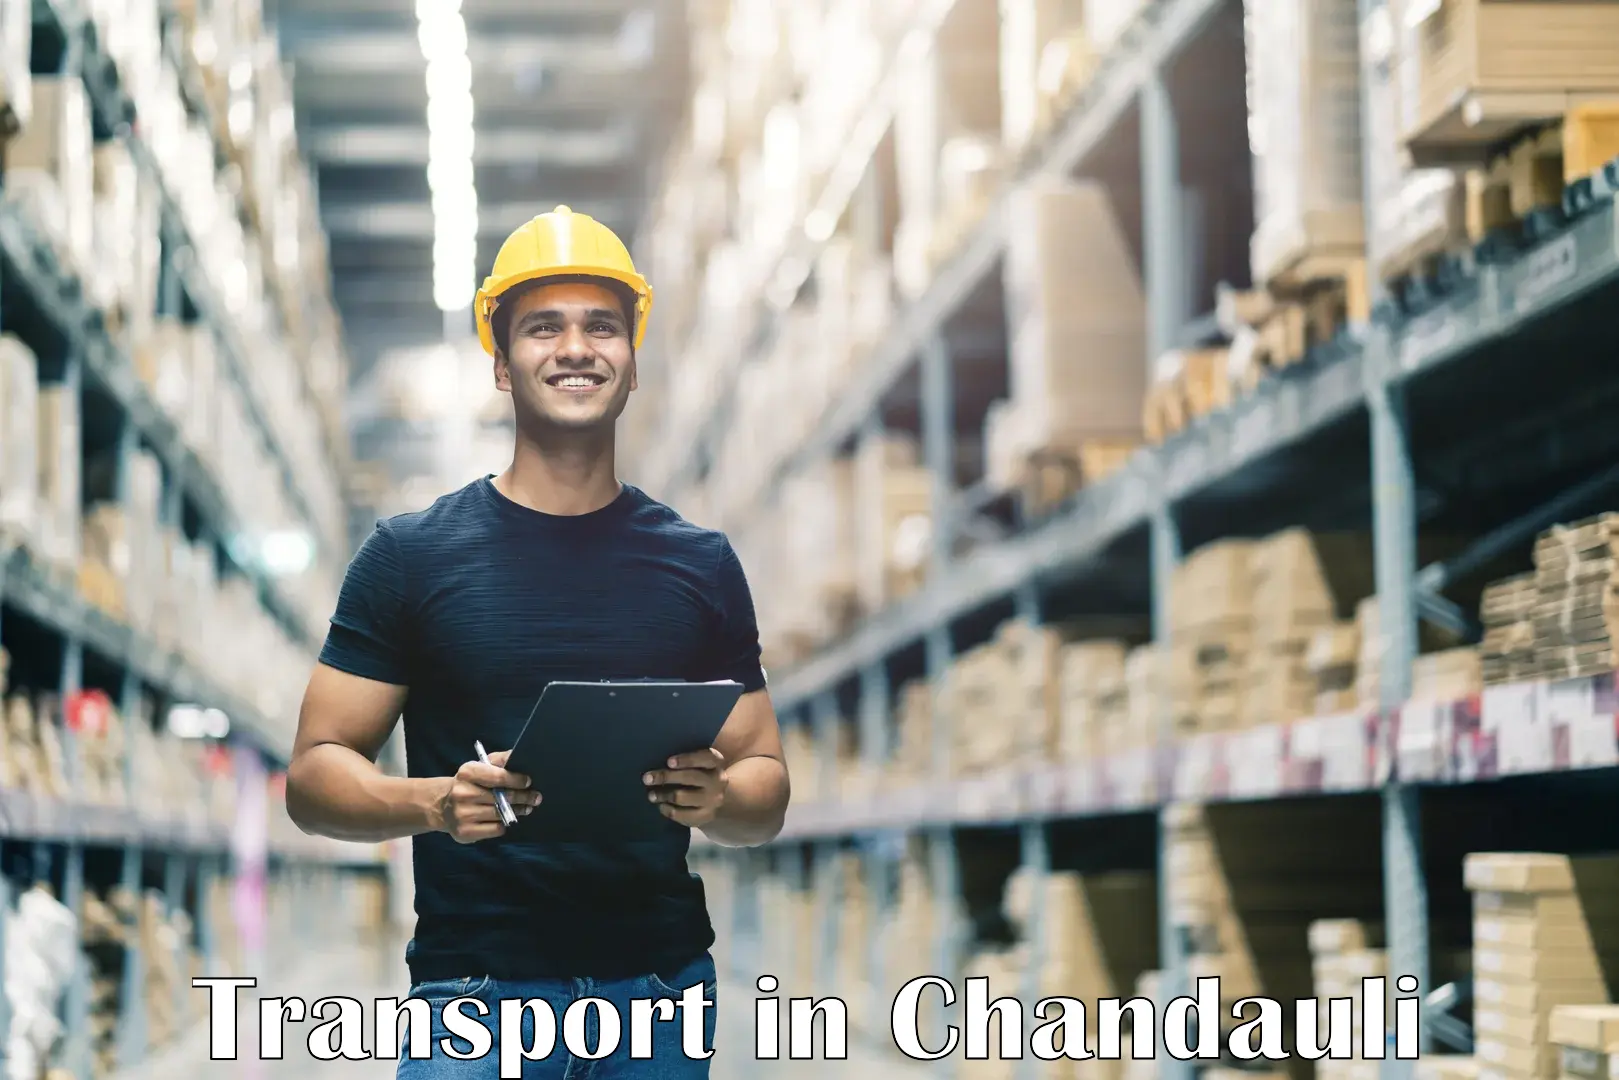 Vehicle transport services in Chandauli